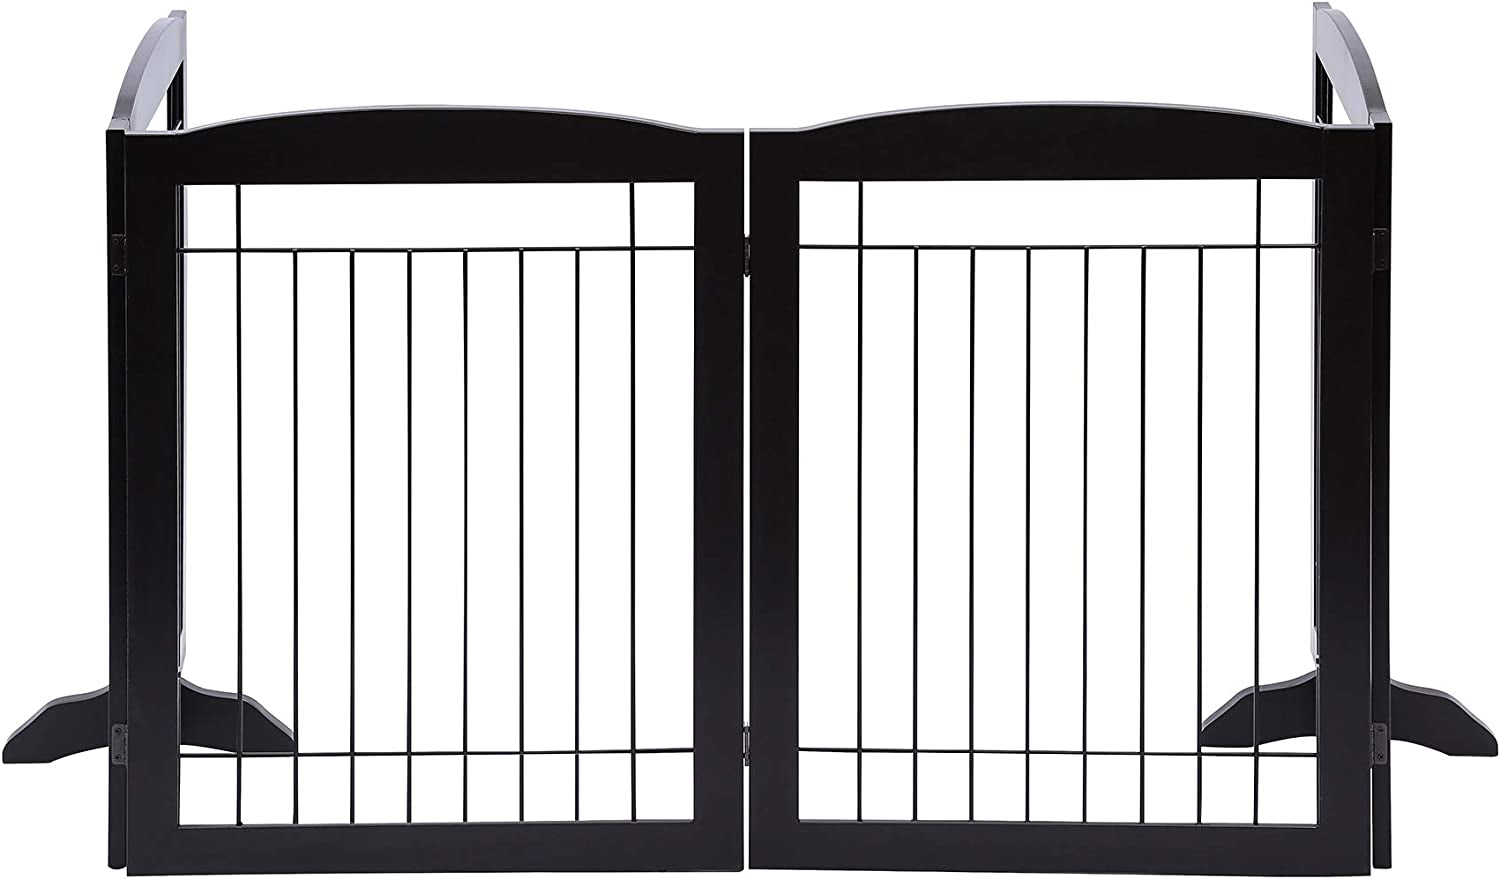 PAWLAND 96-Inch Extra Wide Dog Gate for the House, Doorway, Stairs, Freestanding Foldable Wire Pet Gate, Set of Support Feet Included (Espresso, 30" Height-4 Panels)